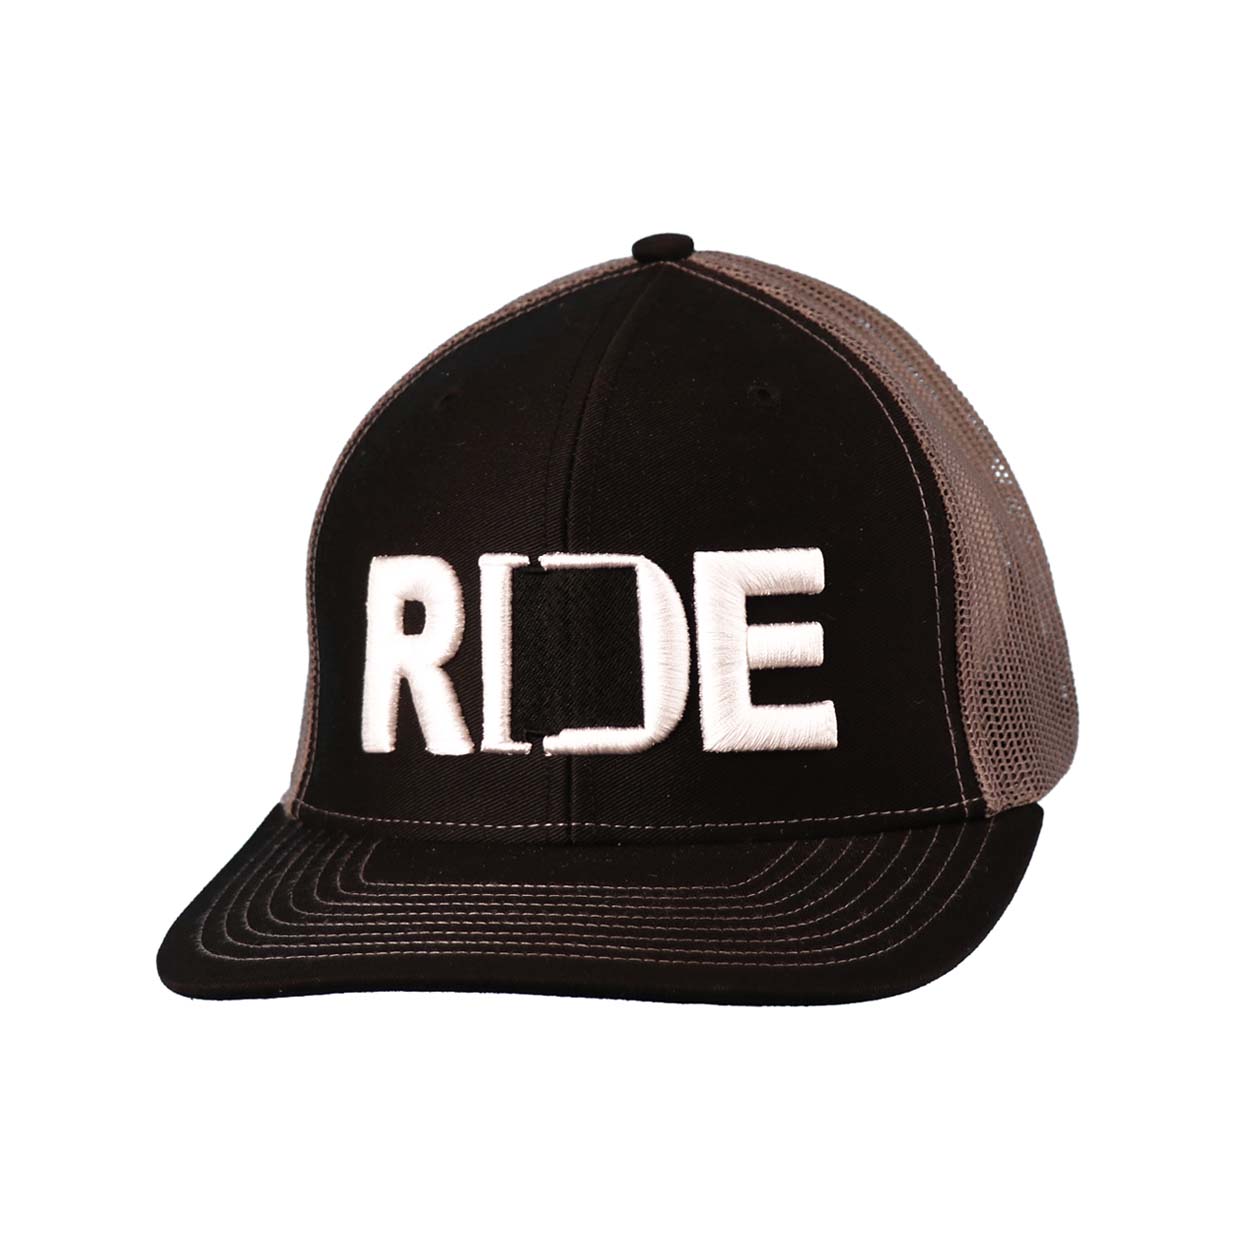 Ride New Mexico Classic Pro 3D Puff Embroidered Snapback Trucker Hat Black/Gray